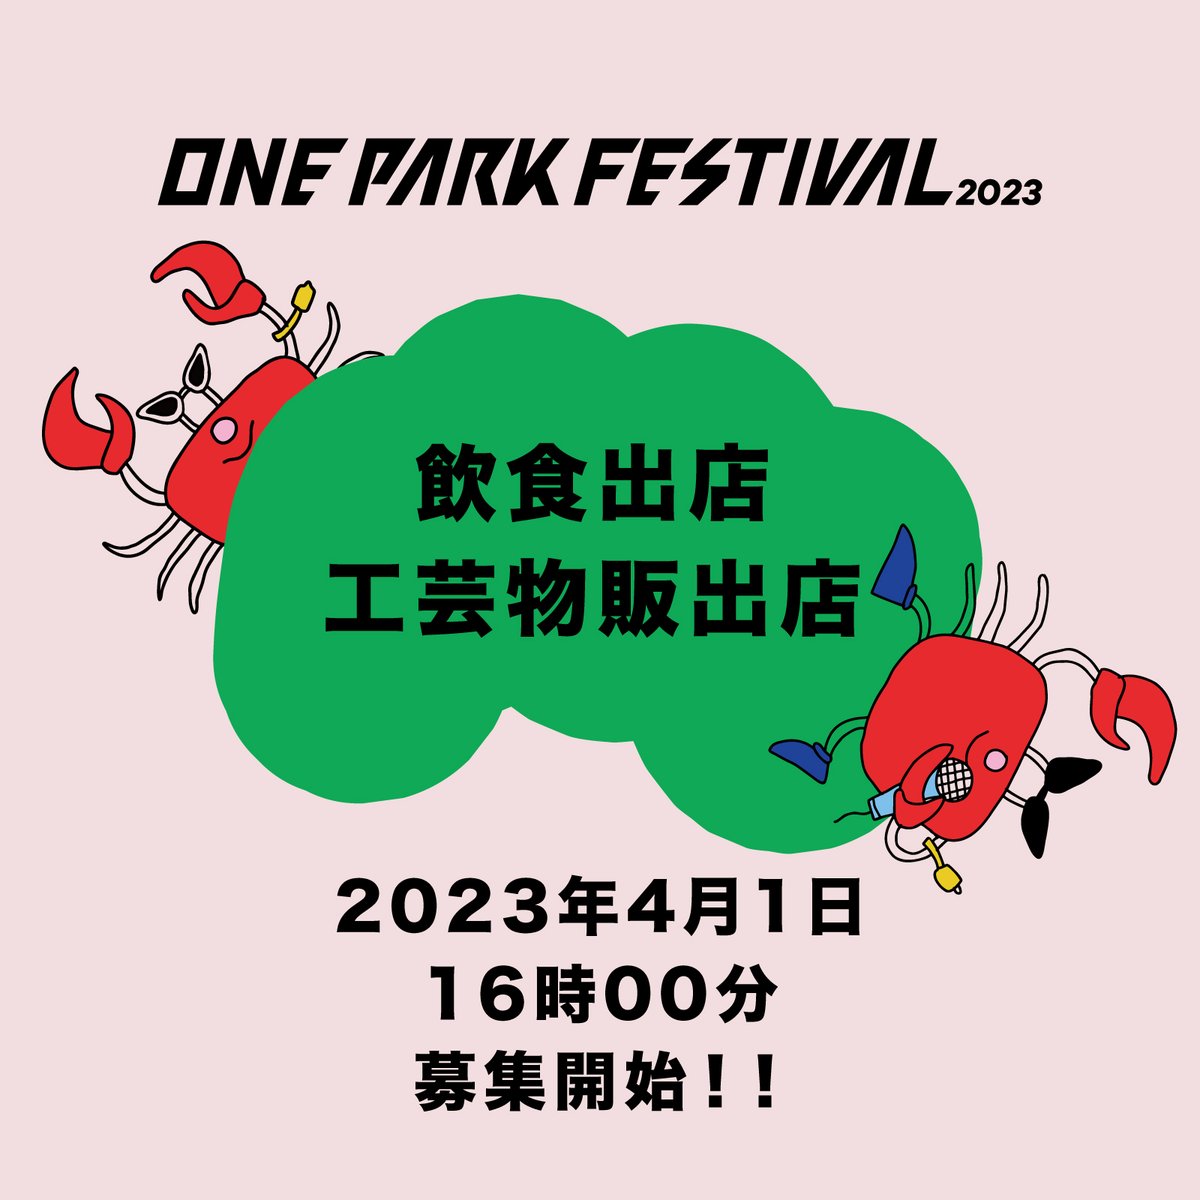 ONE PARK FESTIVAL 2022「２日券」チケット・ワンパーク/9月３日・４日（土）（日）１枚